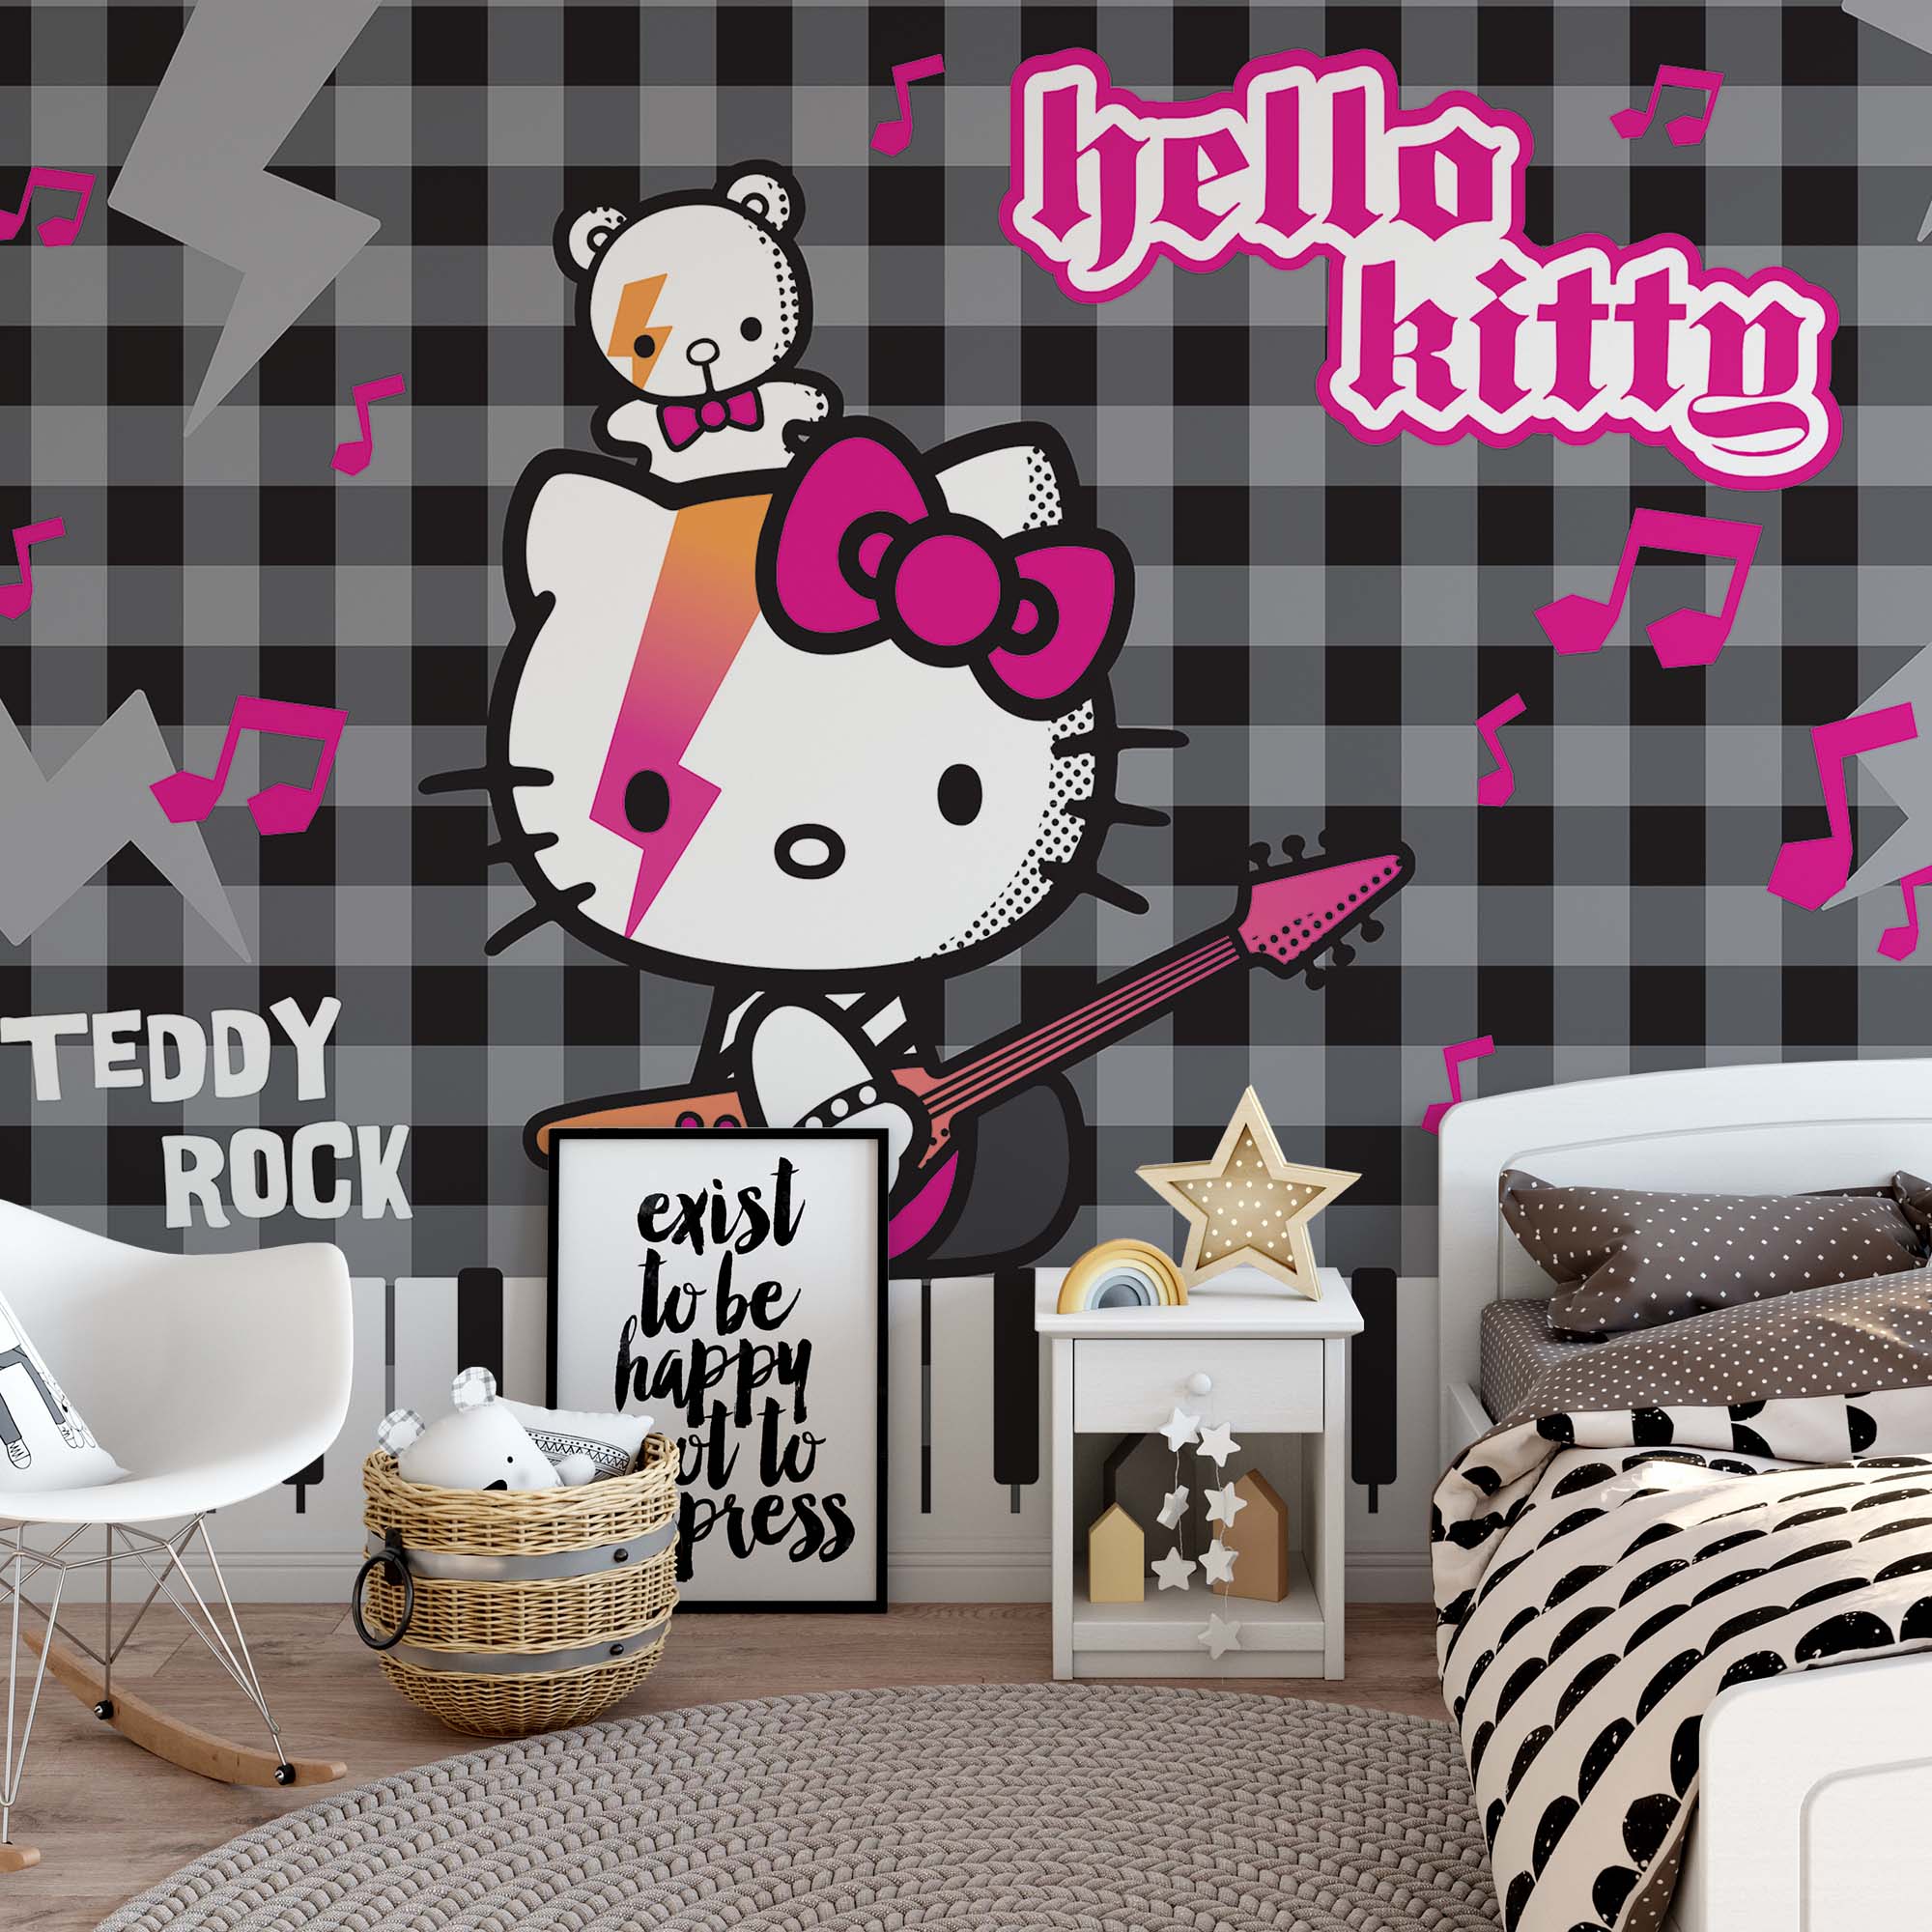 Hello Kitty - Jake And The Neverland Pirates Wall Decal - HD Wallpaper 